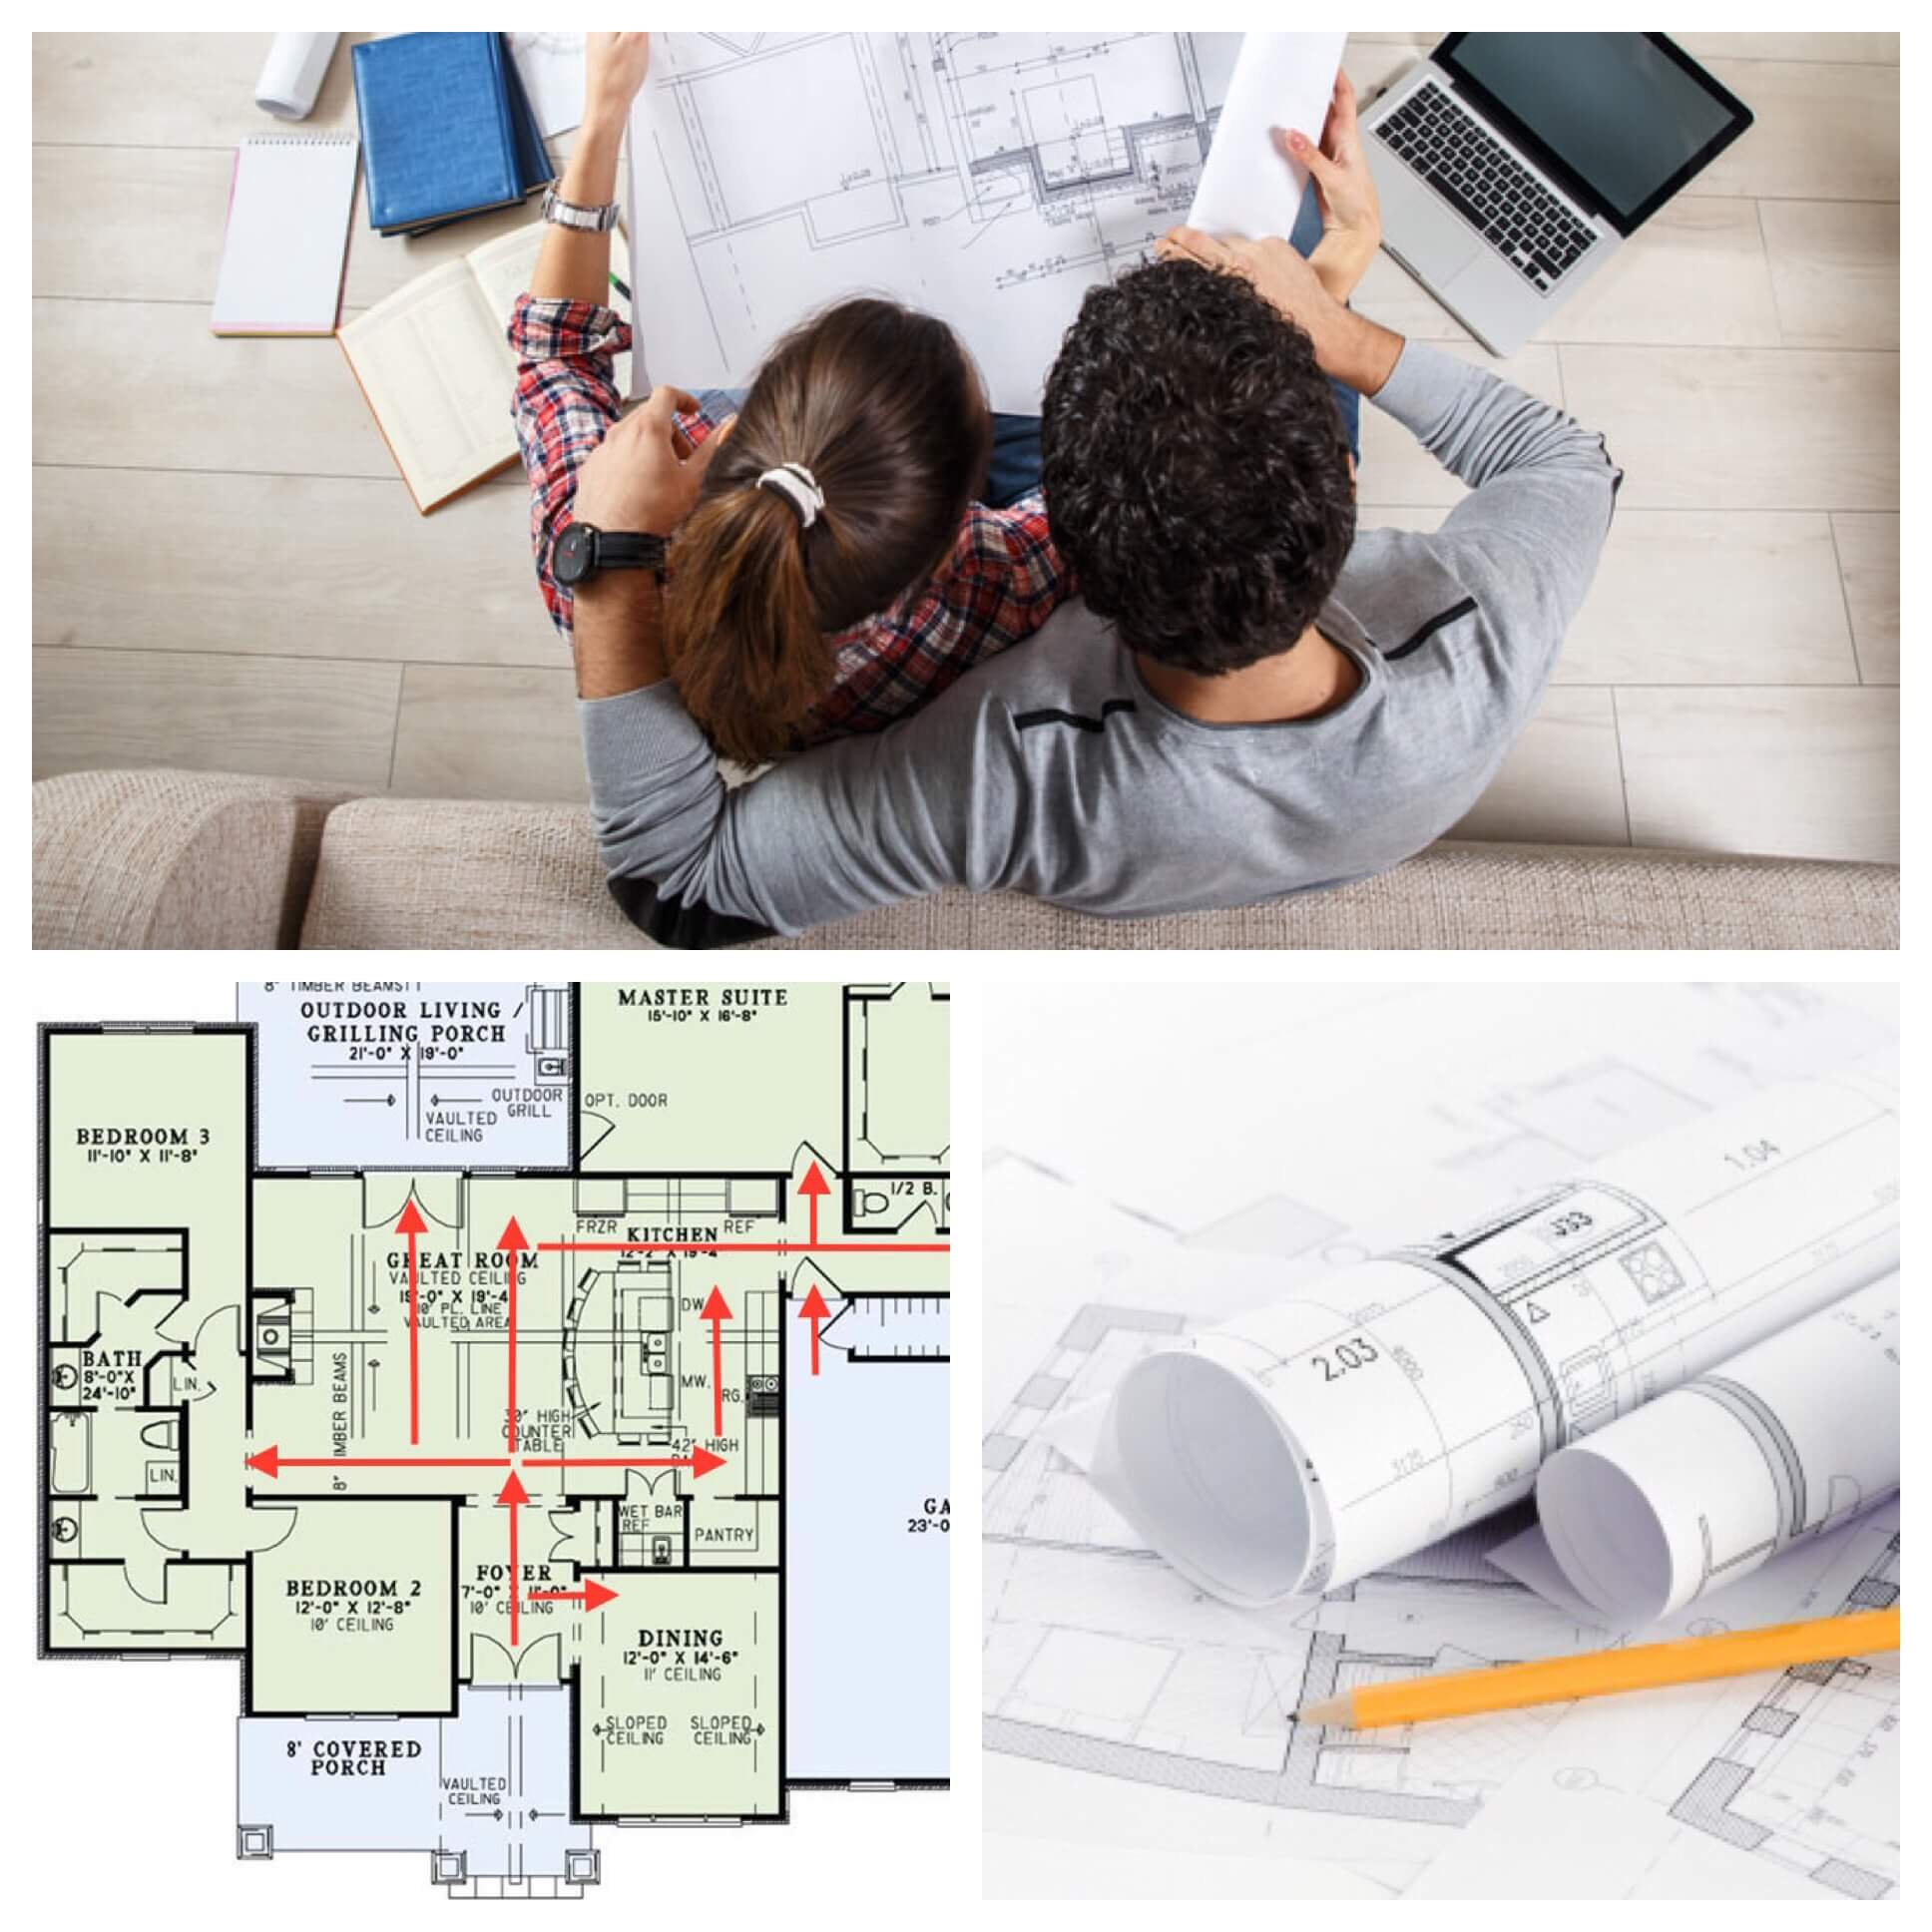 Review your house plans and modify them if necessary to create your dream home.